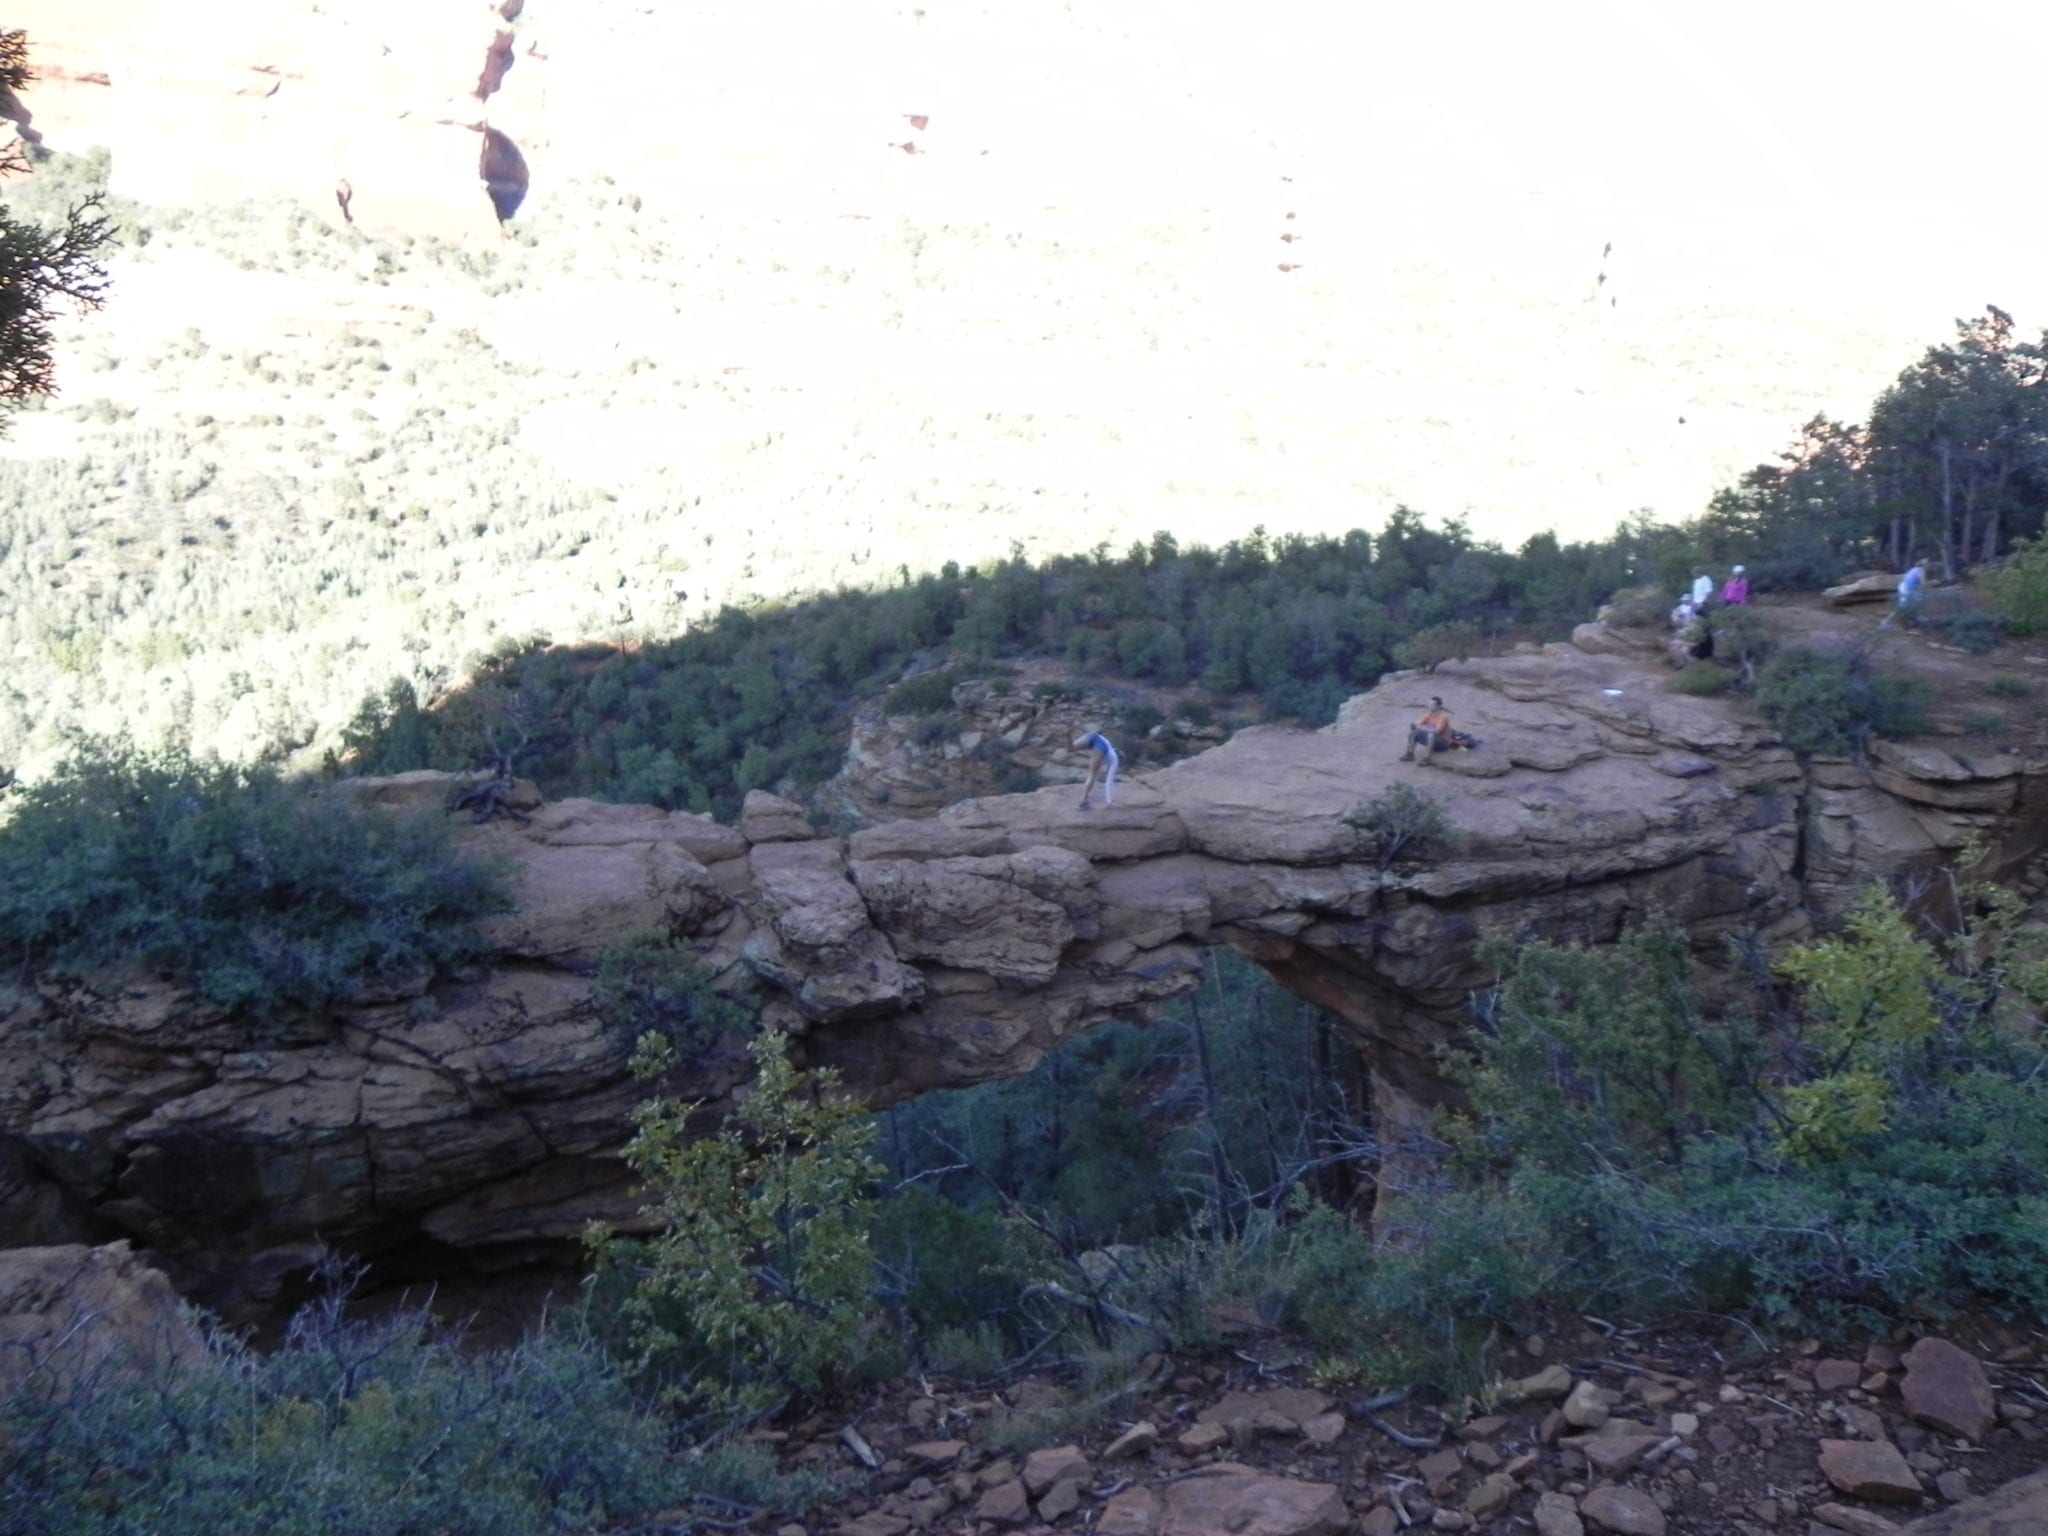 During our last trip to Sedona, we wanted to go for a hike to see Devil's Bridge.  This is a natural land bridge that hovers over the edge of a canyon with over a 100 foot drop.  The hike to get to Devil's Bridge is moderately strenuous and the final climb to the Bridge being accessed by natural rock steps that can be tough to navigate by those who are not in shape or have bad knees etc.  But if you are able to make it to the top and walk out to view the bridge it is WELL WORTH the effort.    Once you see this amazing natural land bridge your next thought is to hike over to it and walk out onto it.  This part is not for the feint of heart and there is no protection from the edge and the bridge gets thin towards the center.  But like clockwork people were hiking out there, standing for pictures and one girl was going to do a hand stand or some sort of yoga move while her friend took a picture.    This is a great hike and well worth the effort.  Devil's Bridge parking is off Long Canyon Rd but there is also a forest service rd that cars were using but I would recommend a truck just because some cars were barely making it. It is certainly much less of a hike by using the forest road so to each their own.  I highly recommend Devil's Bridge in Sedona.